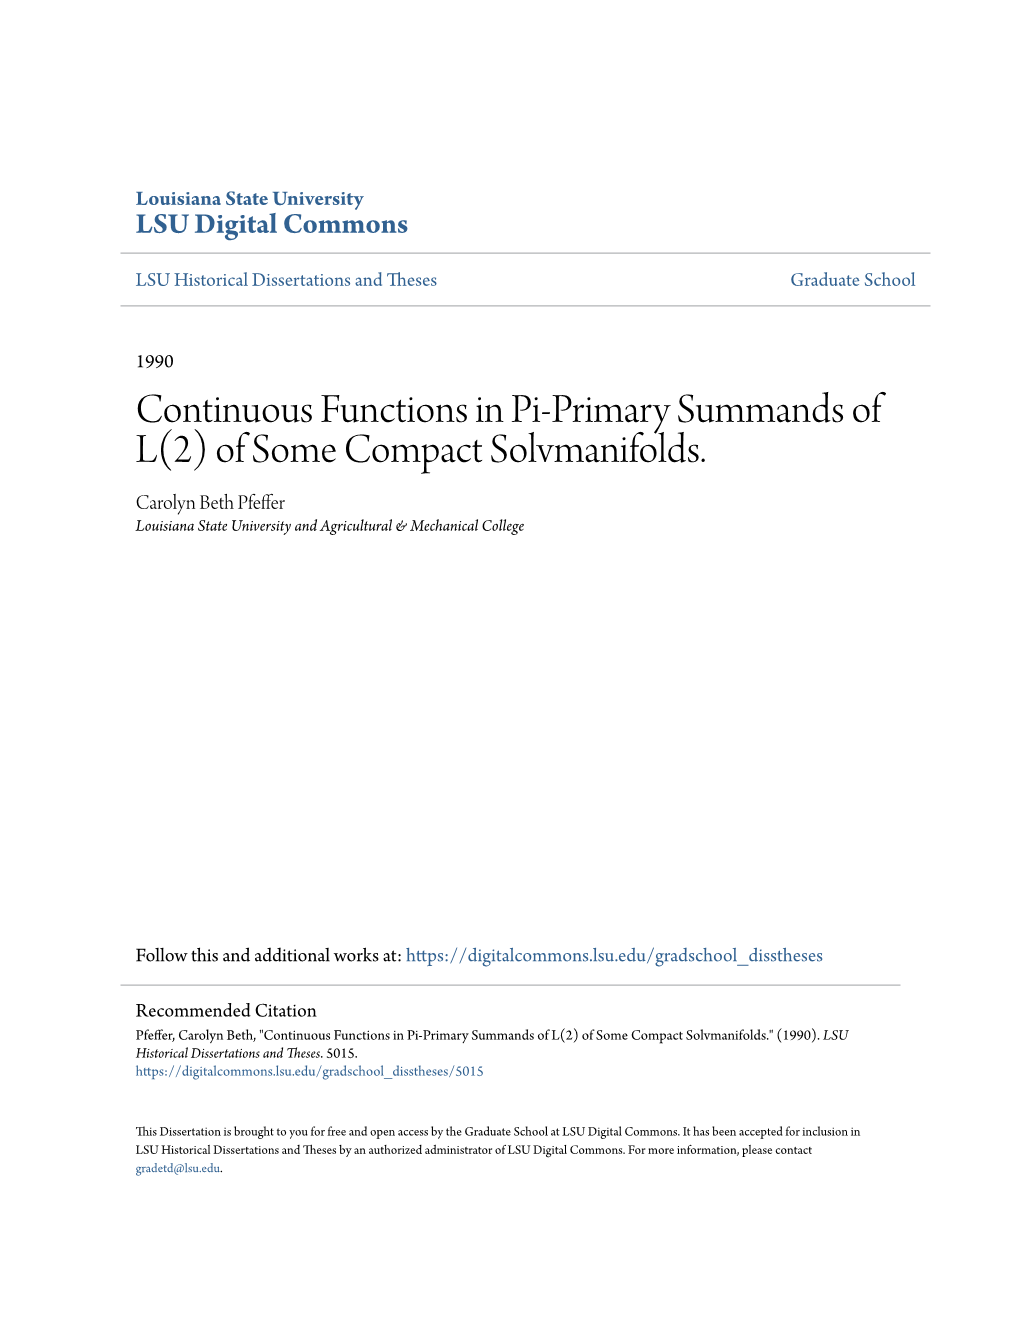 Continuous Functions in Pi-Primary Summands of L(2) of Some Compact Solvmanifolds